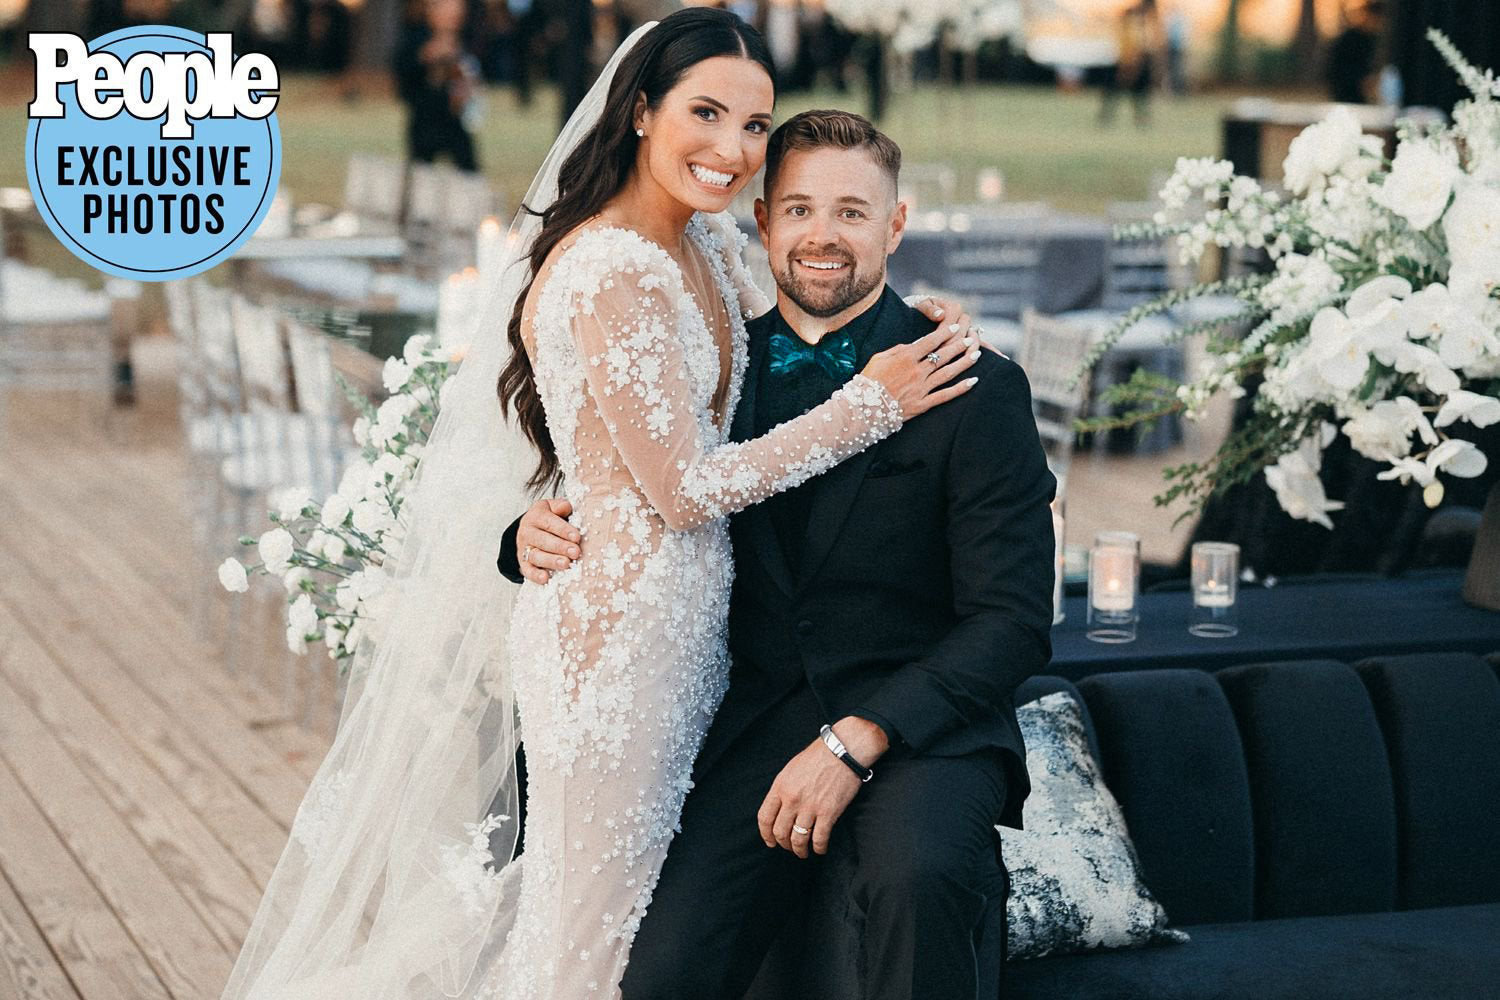 NASCAR Driver Ricky Stenhouse, Jr., wearing the bestselling Rice bow tie at his wedding to Madyson Goodfleisch. Photography courtesy of Brackish